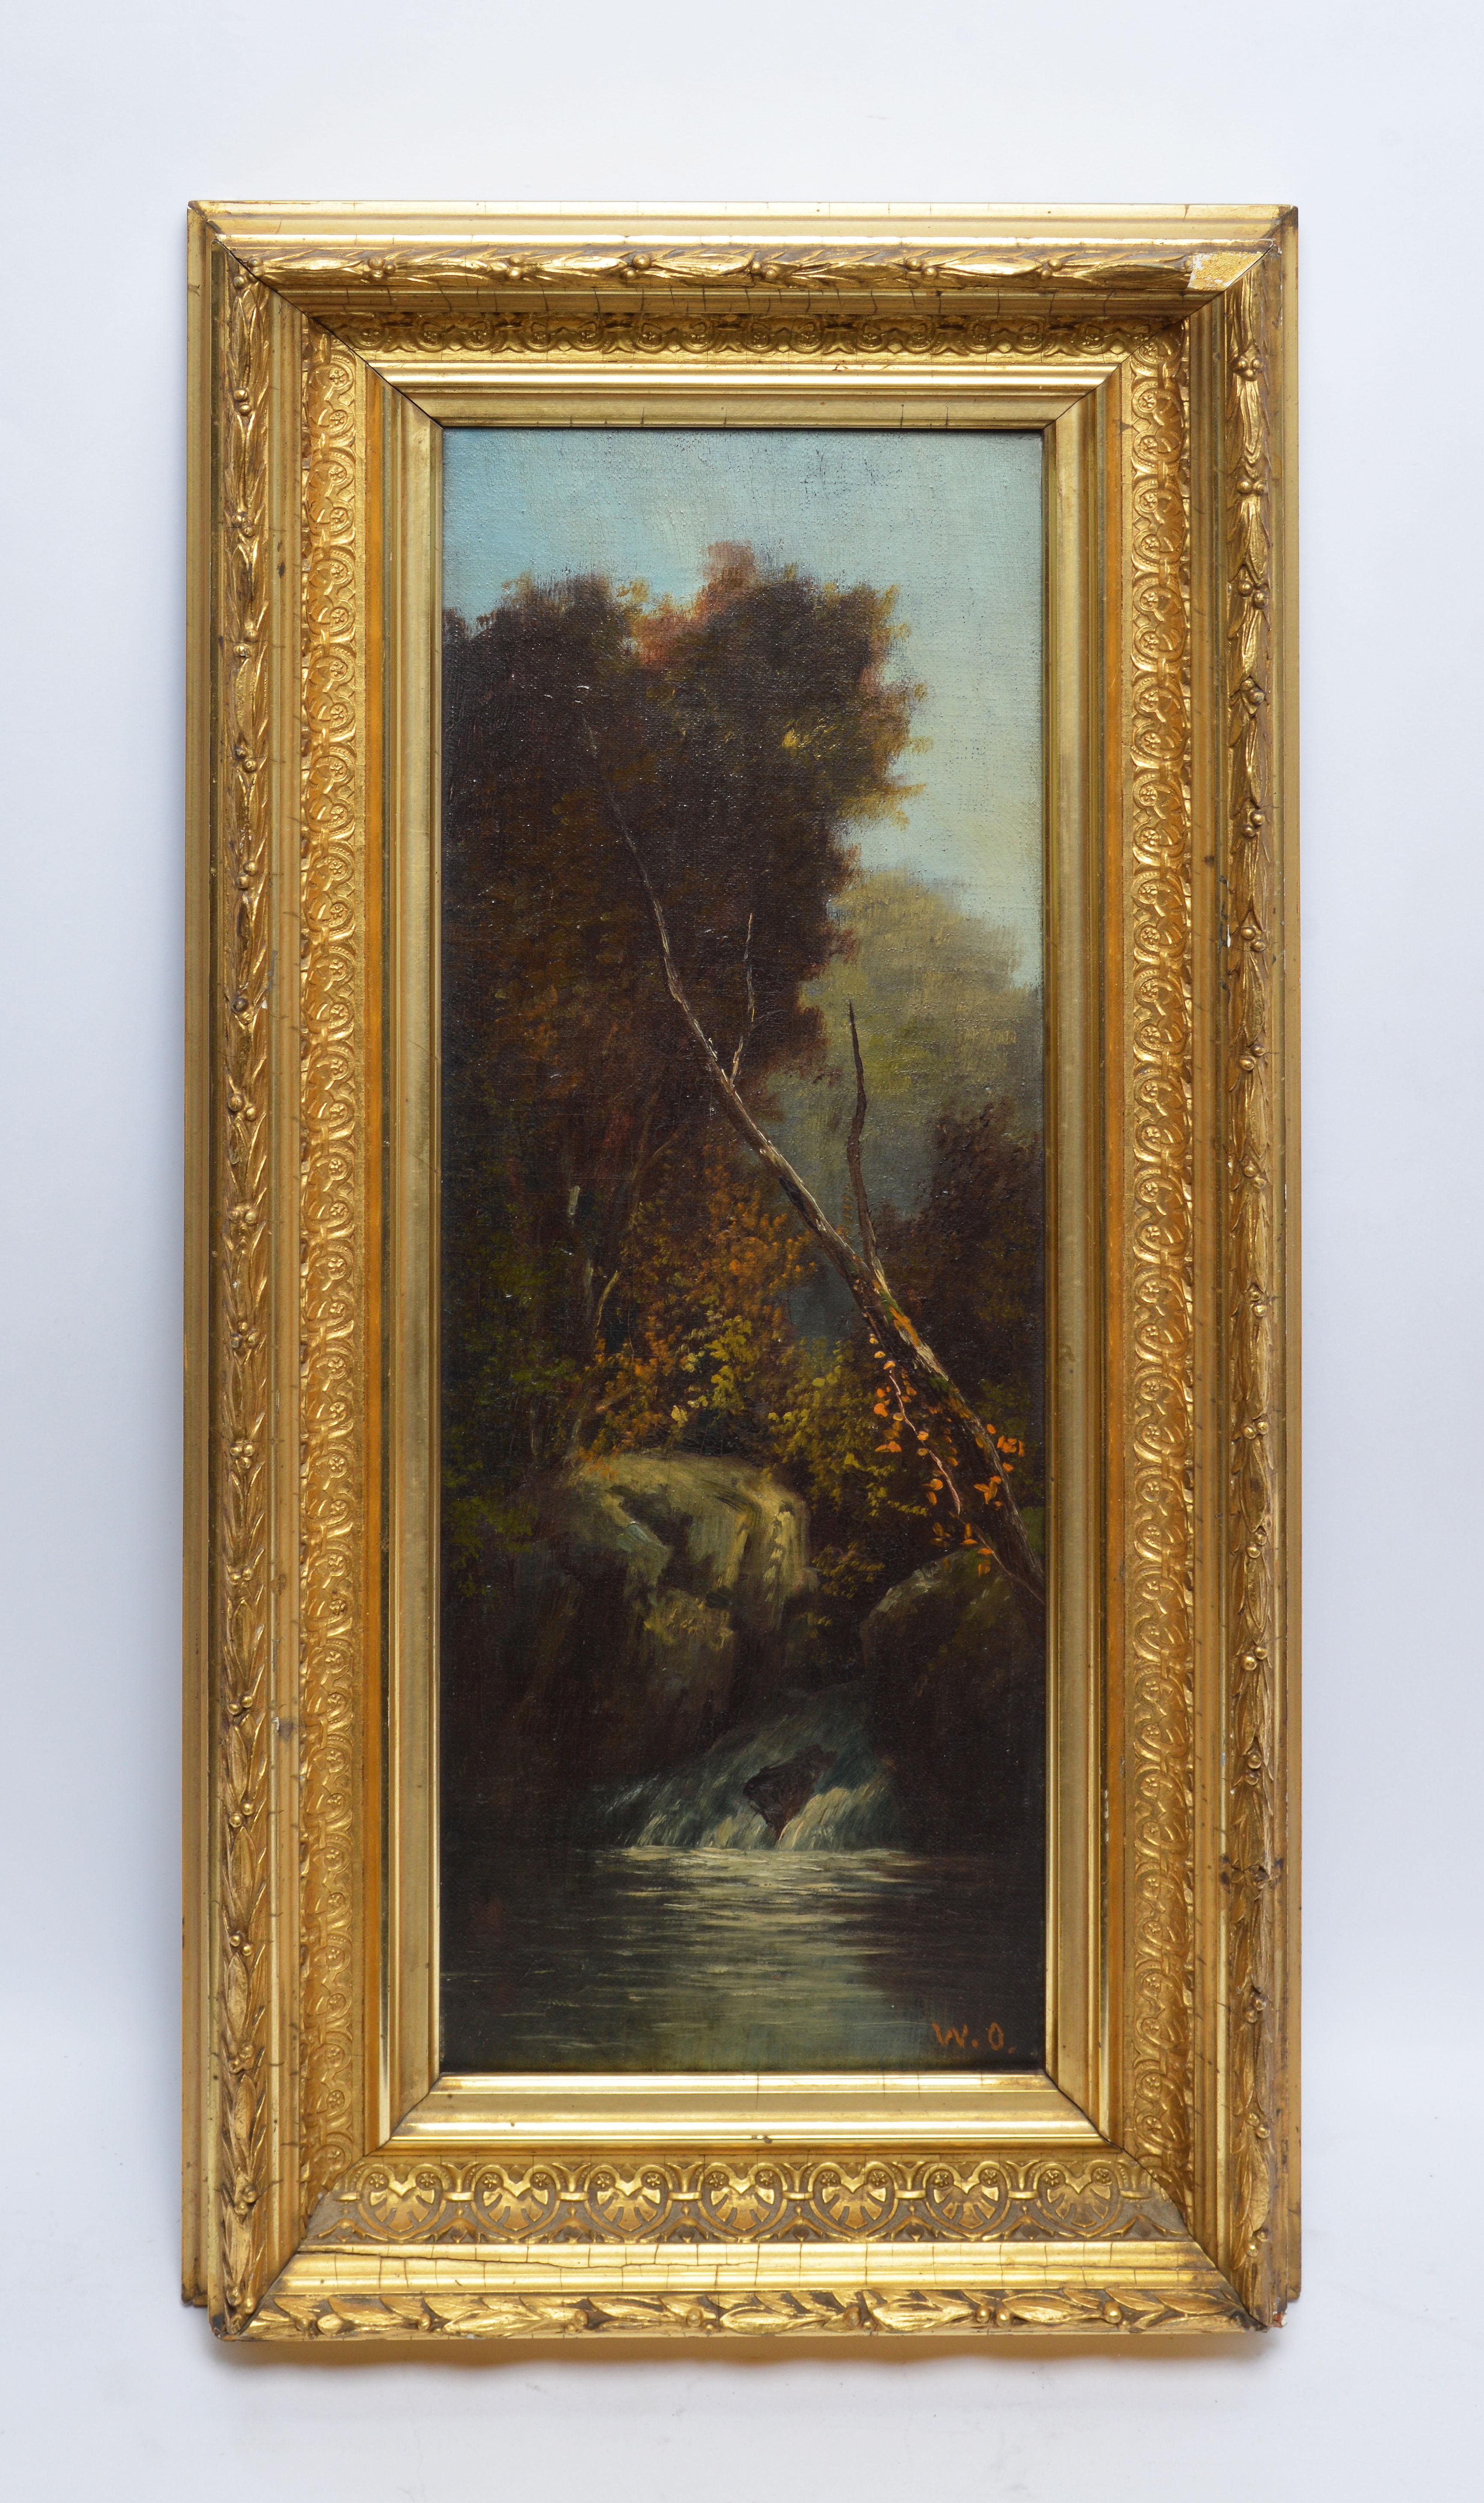 Antique Hudson River School Forest Interior Landscape Waterfall, William Ongley 1